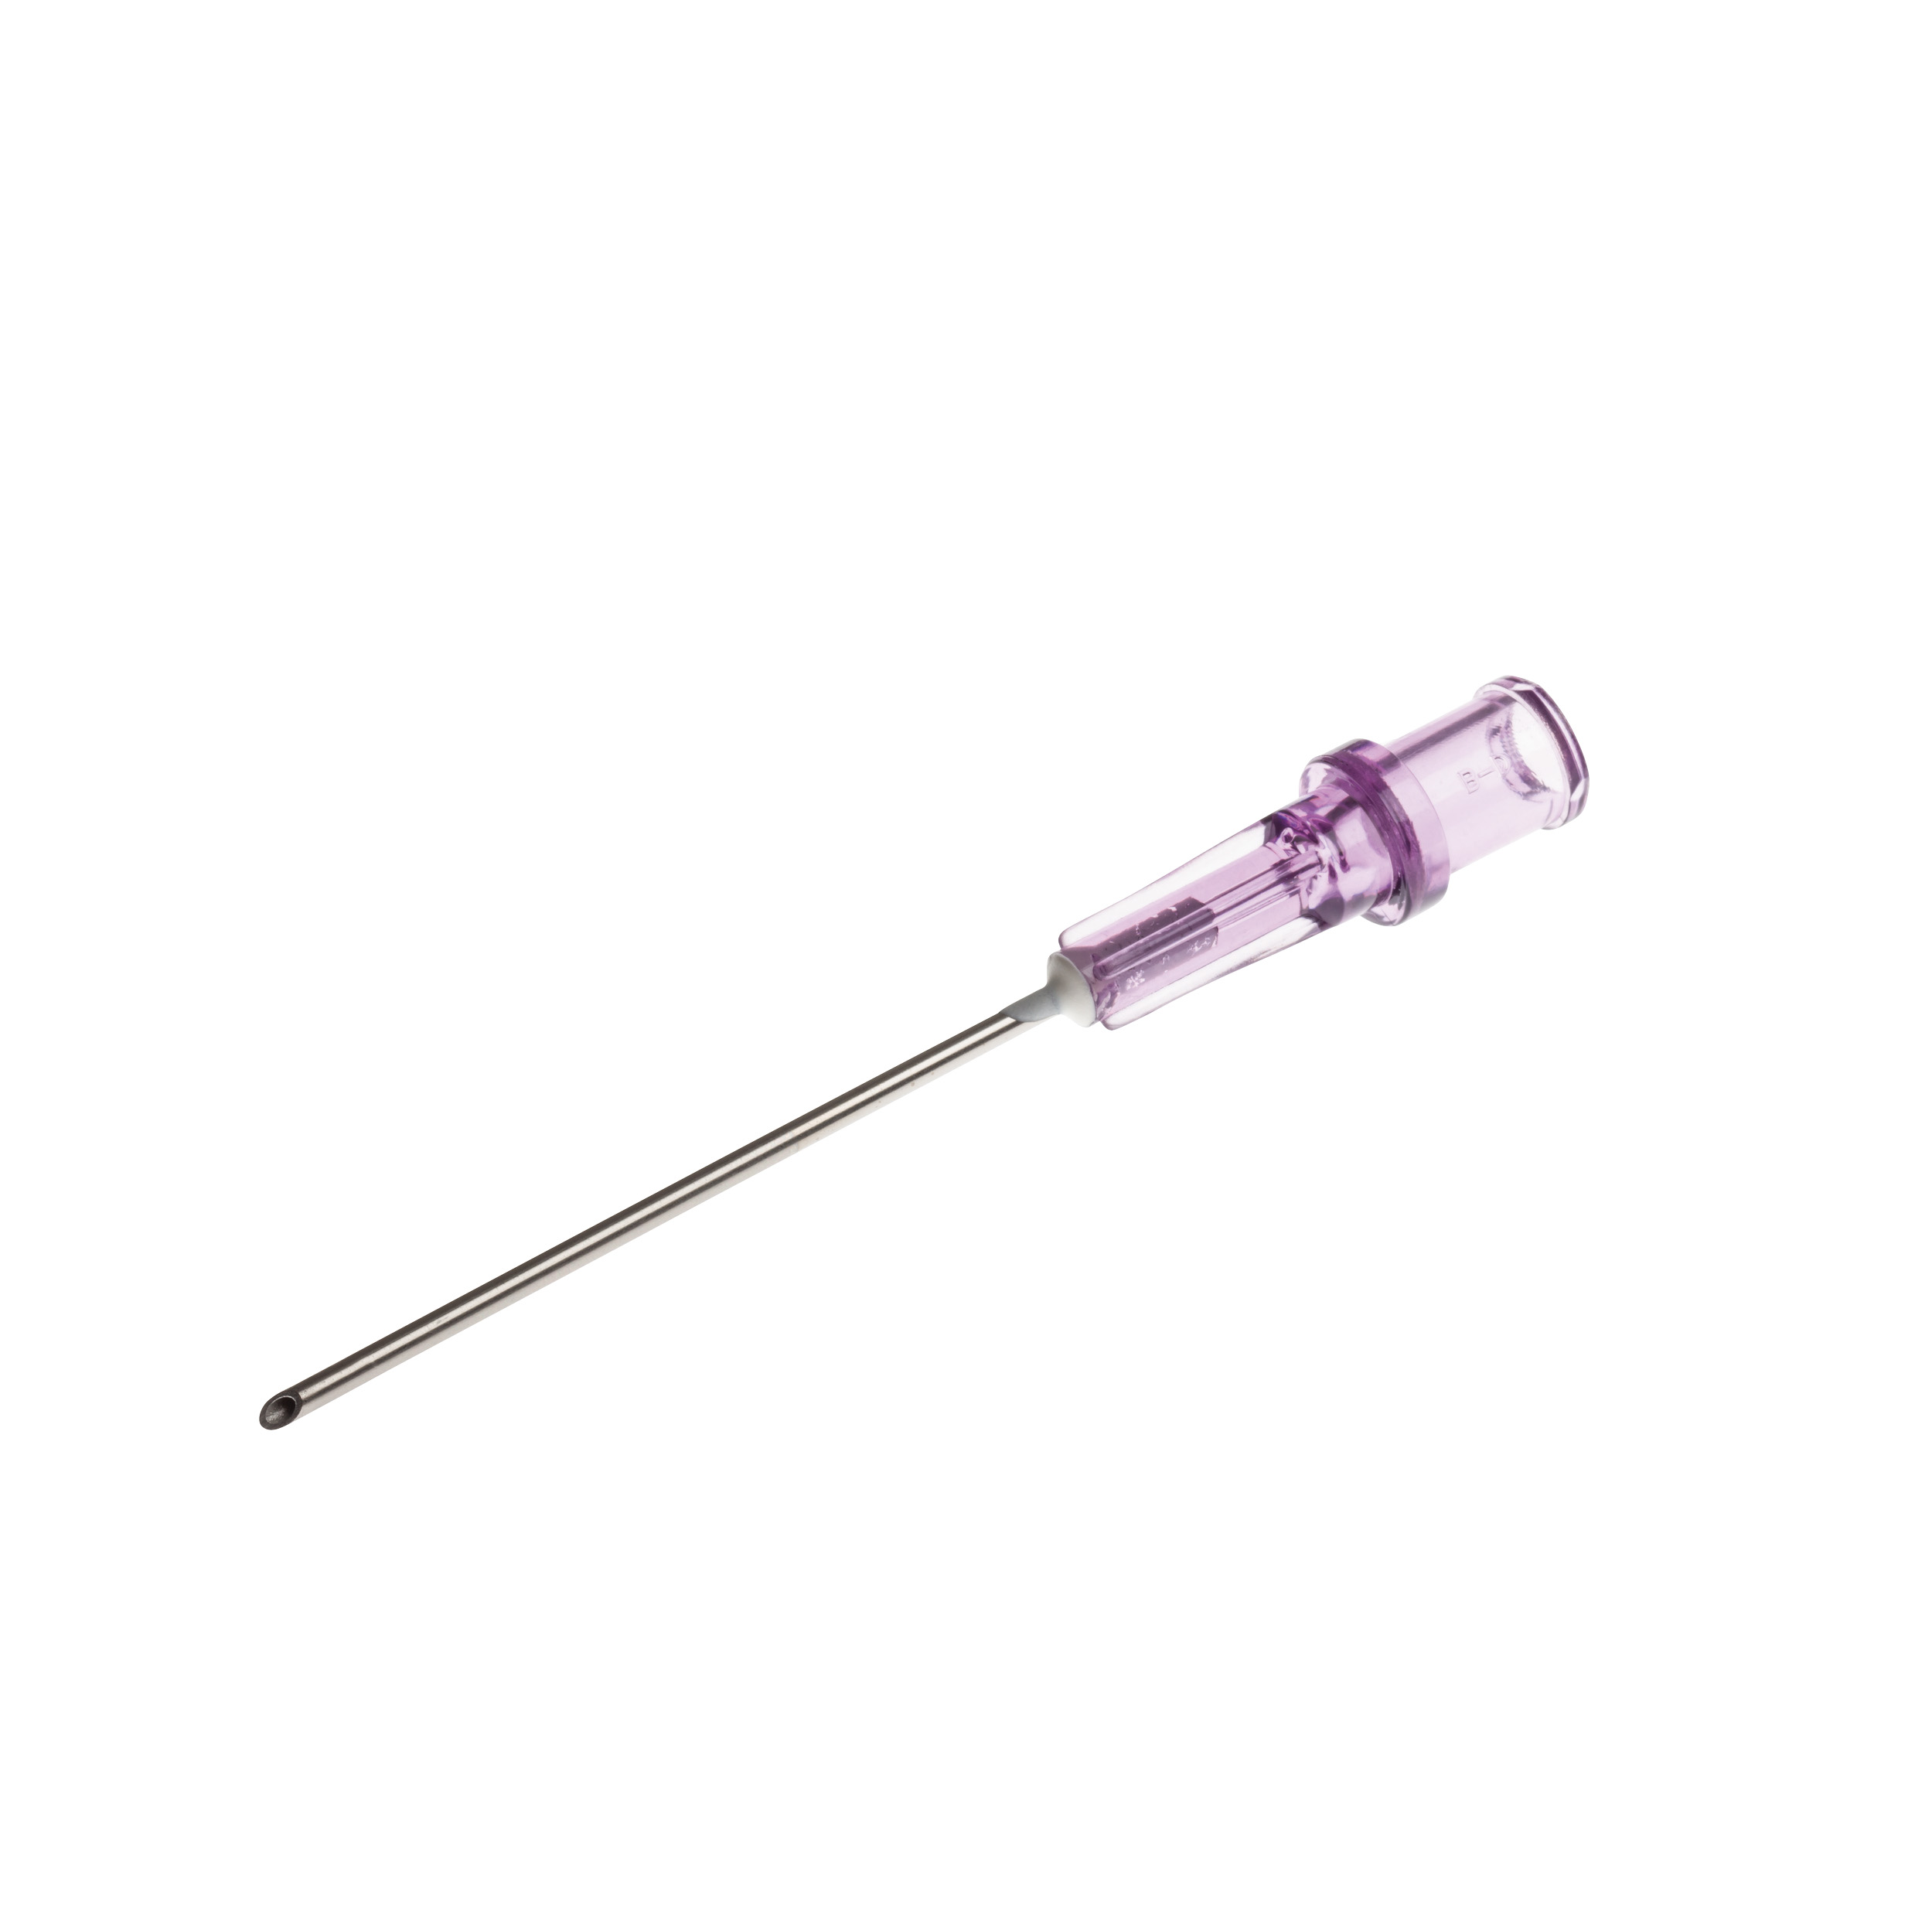 BD® Blunt Fill Needle with Filter - 18g x 1.5